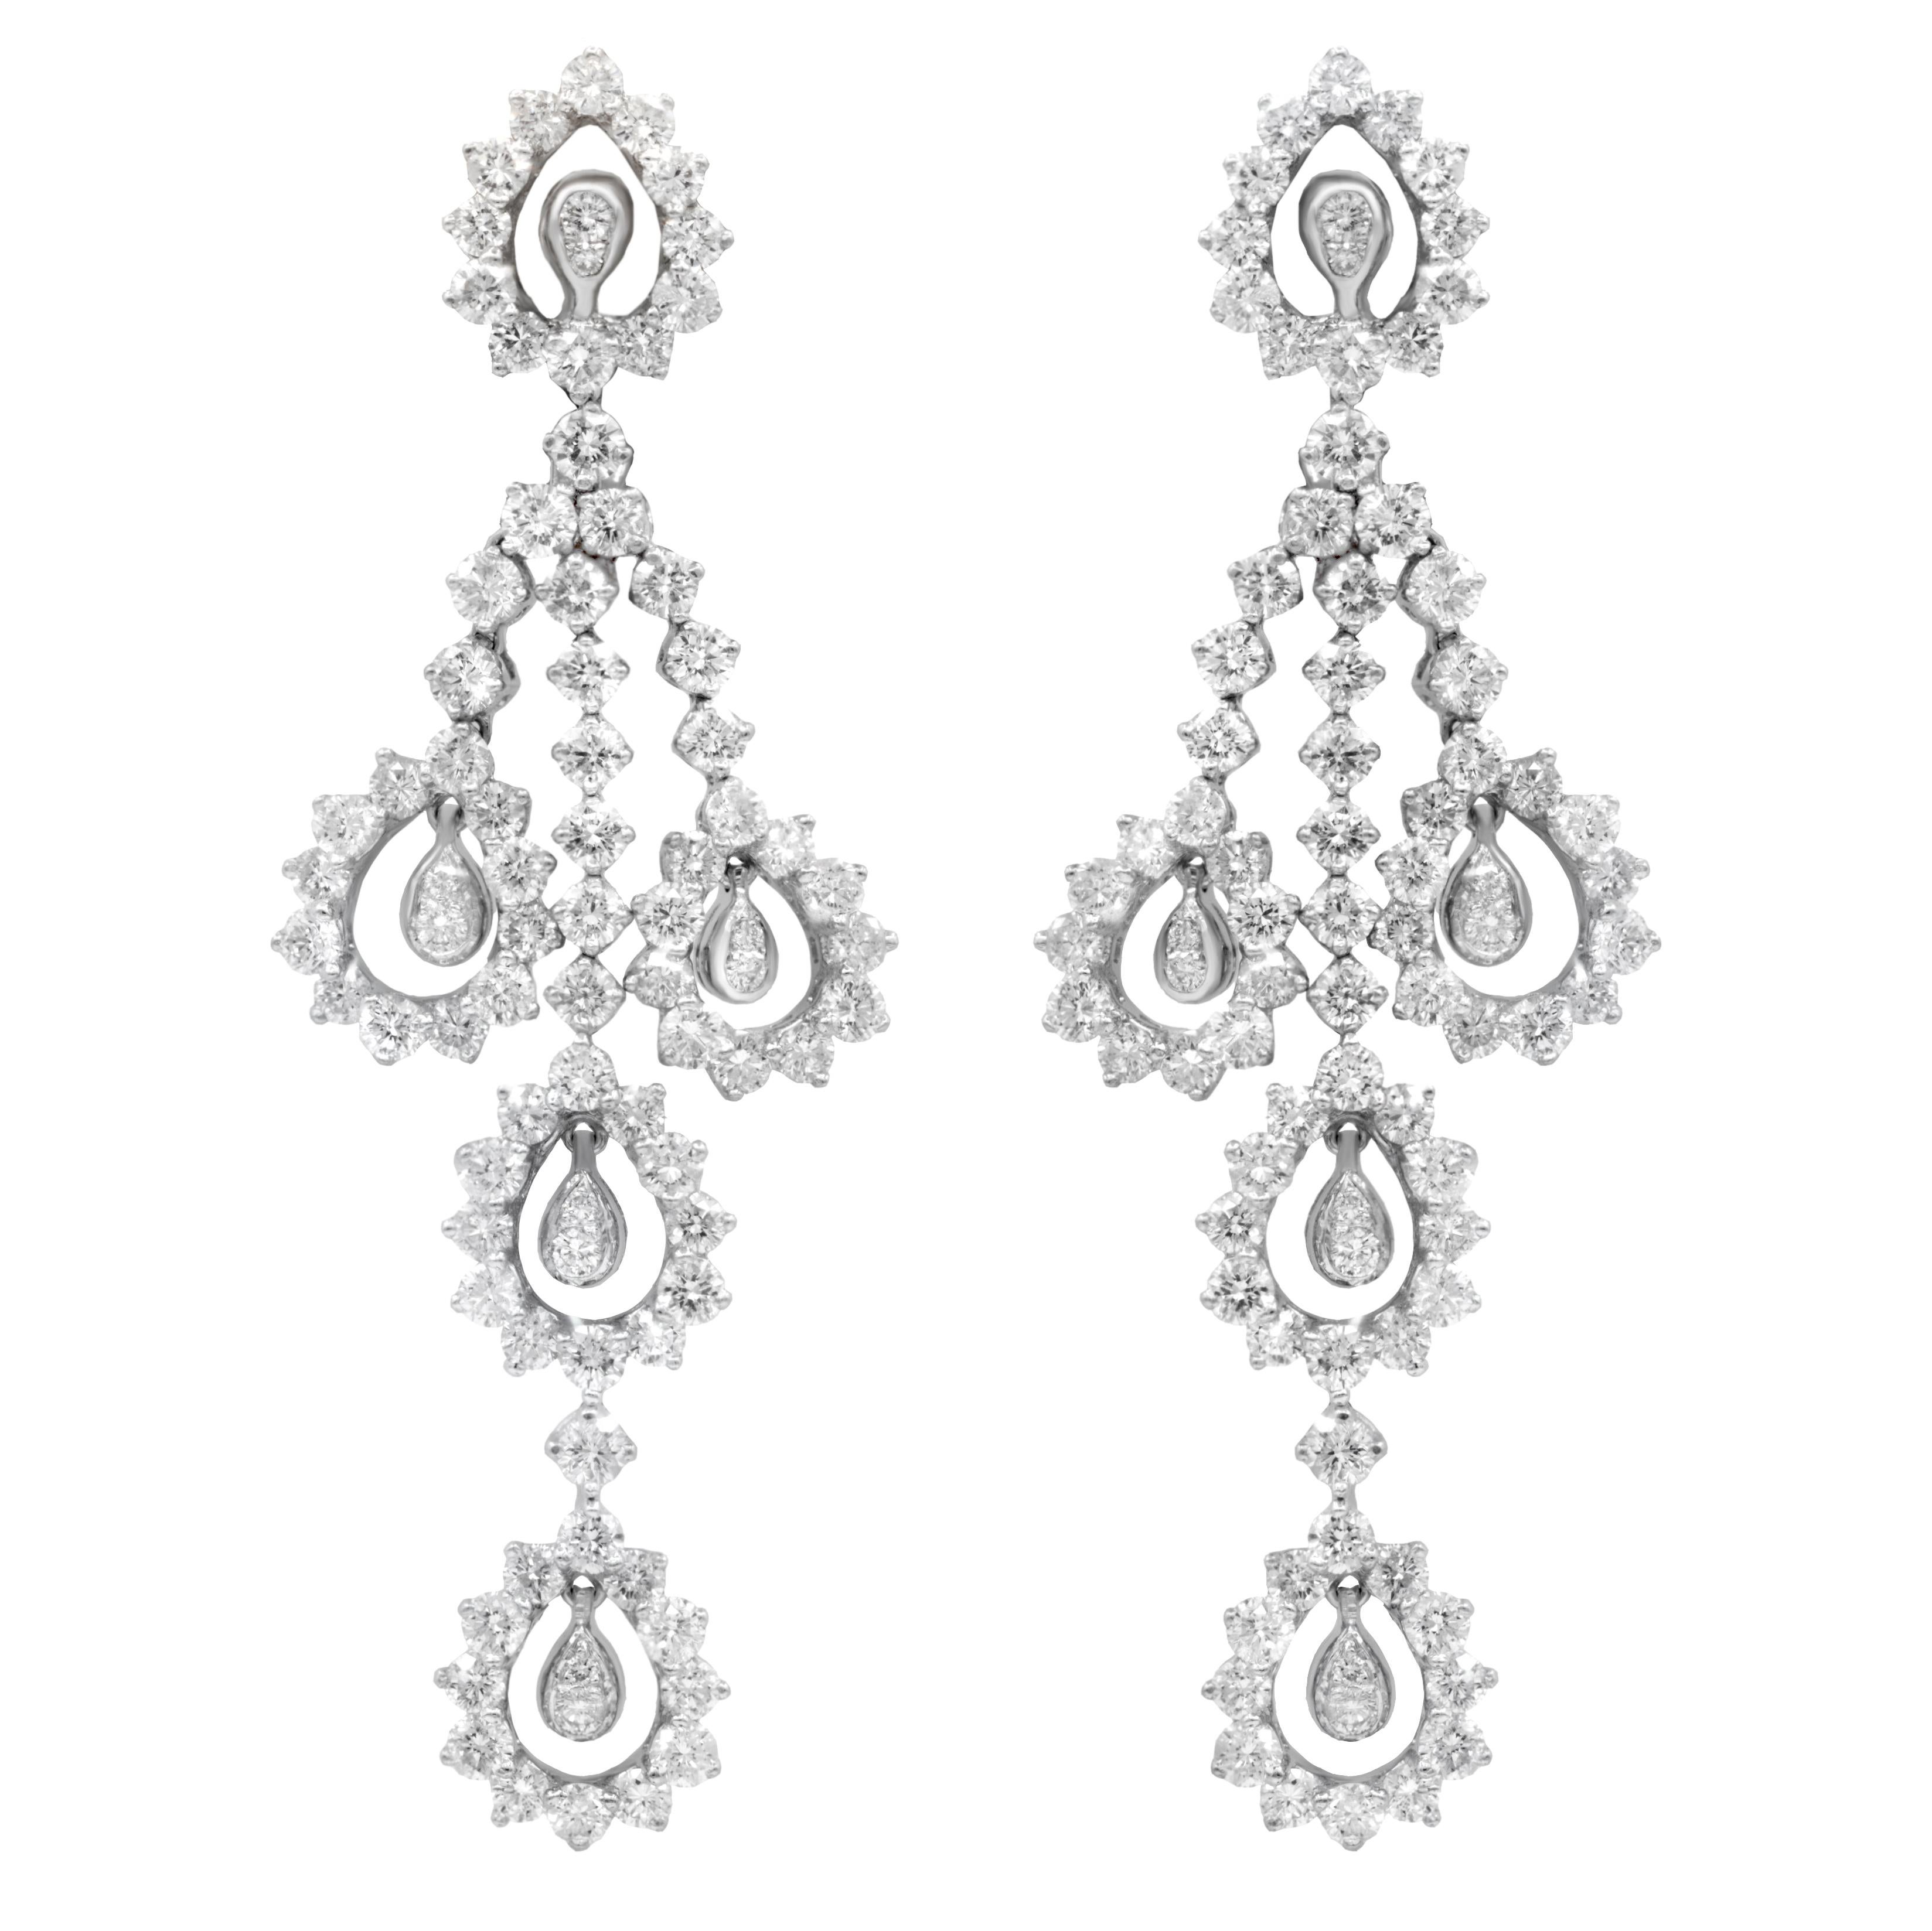 18kt  diamond earrings hanging match for (dnk1362) 5.50ct total weight
